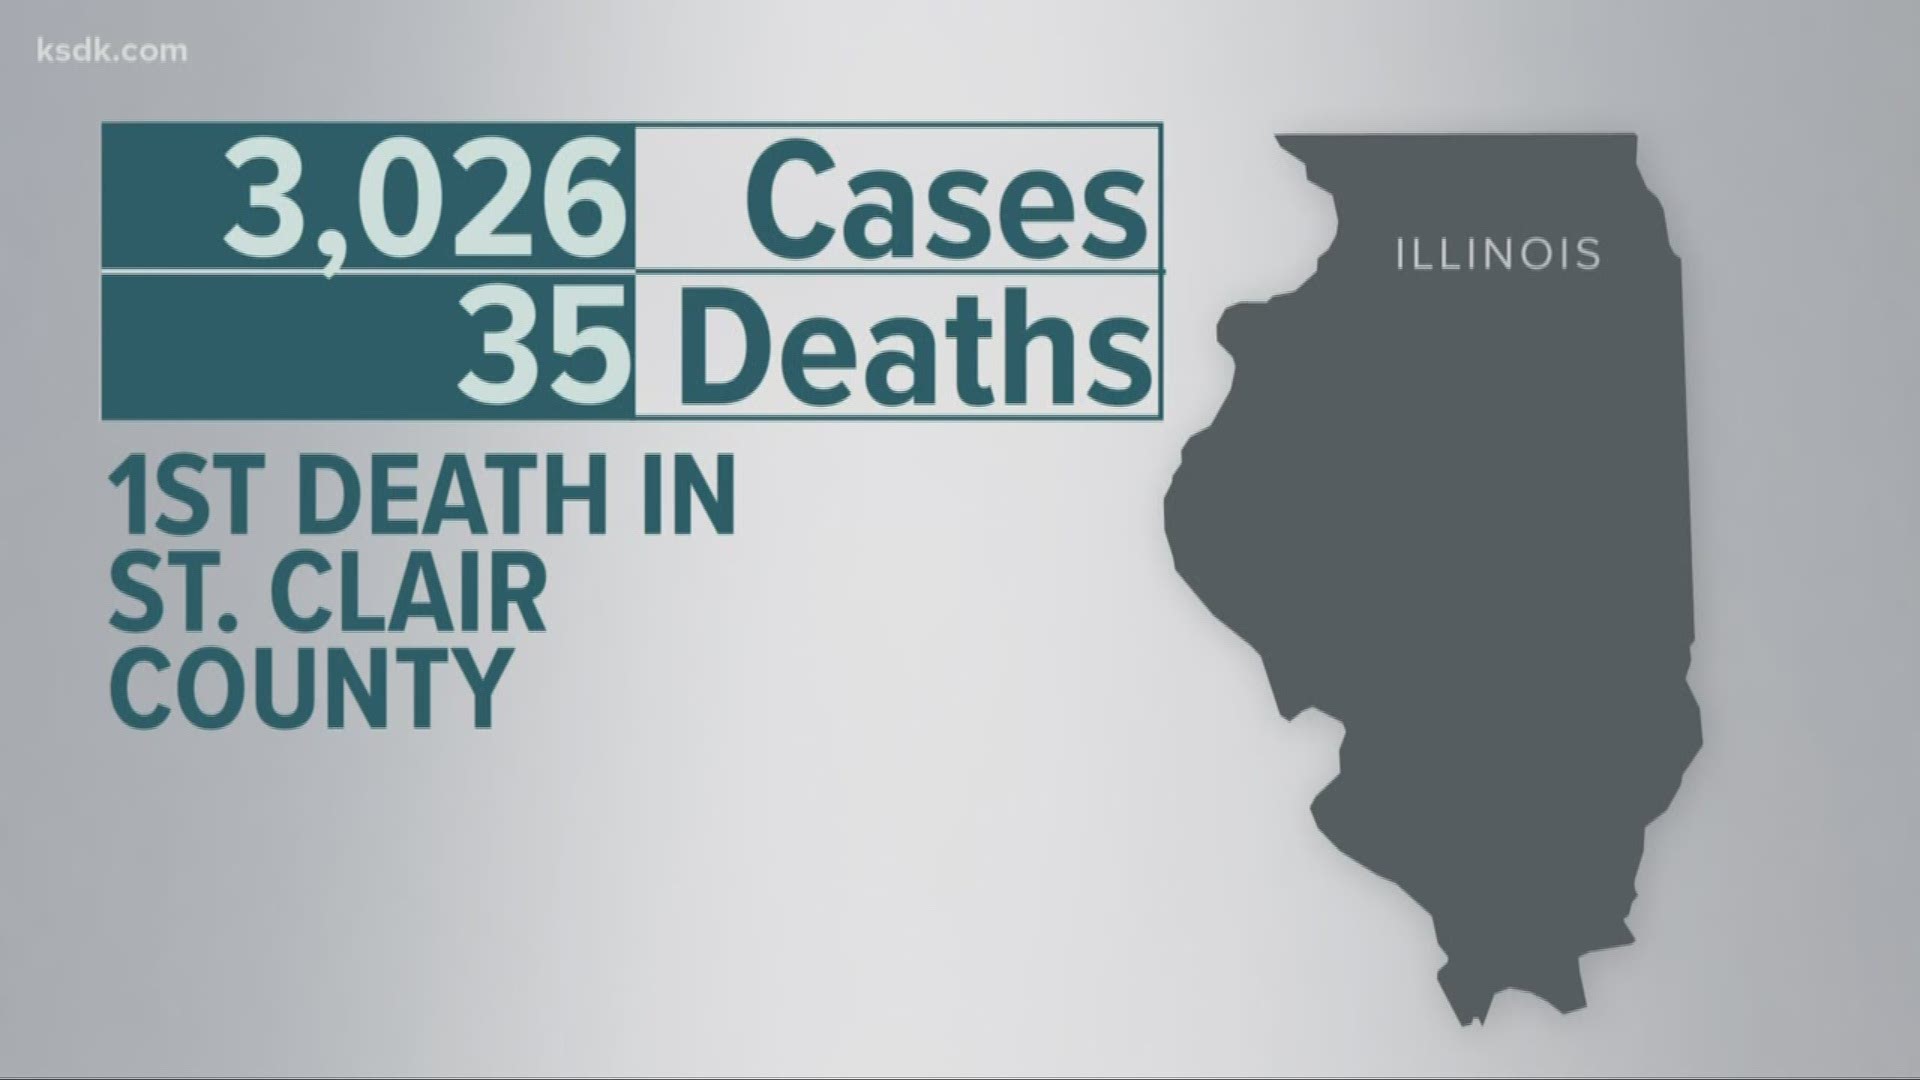 The latest on the  number of cases and deaths caused by COVID-19 in IL and MO as of 6 P.M. on March 27